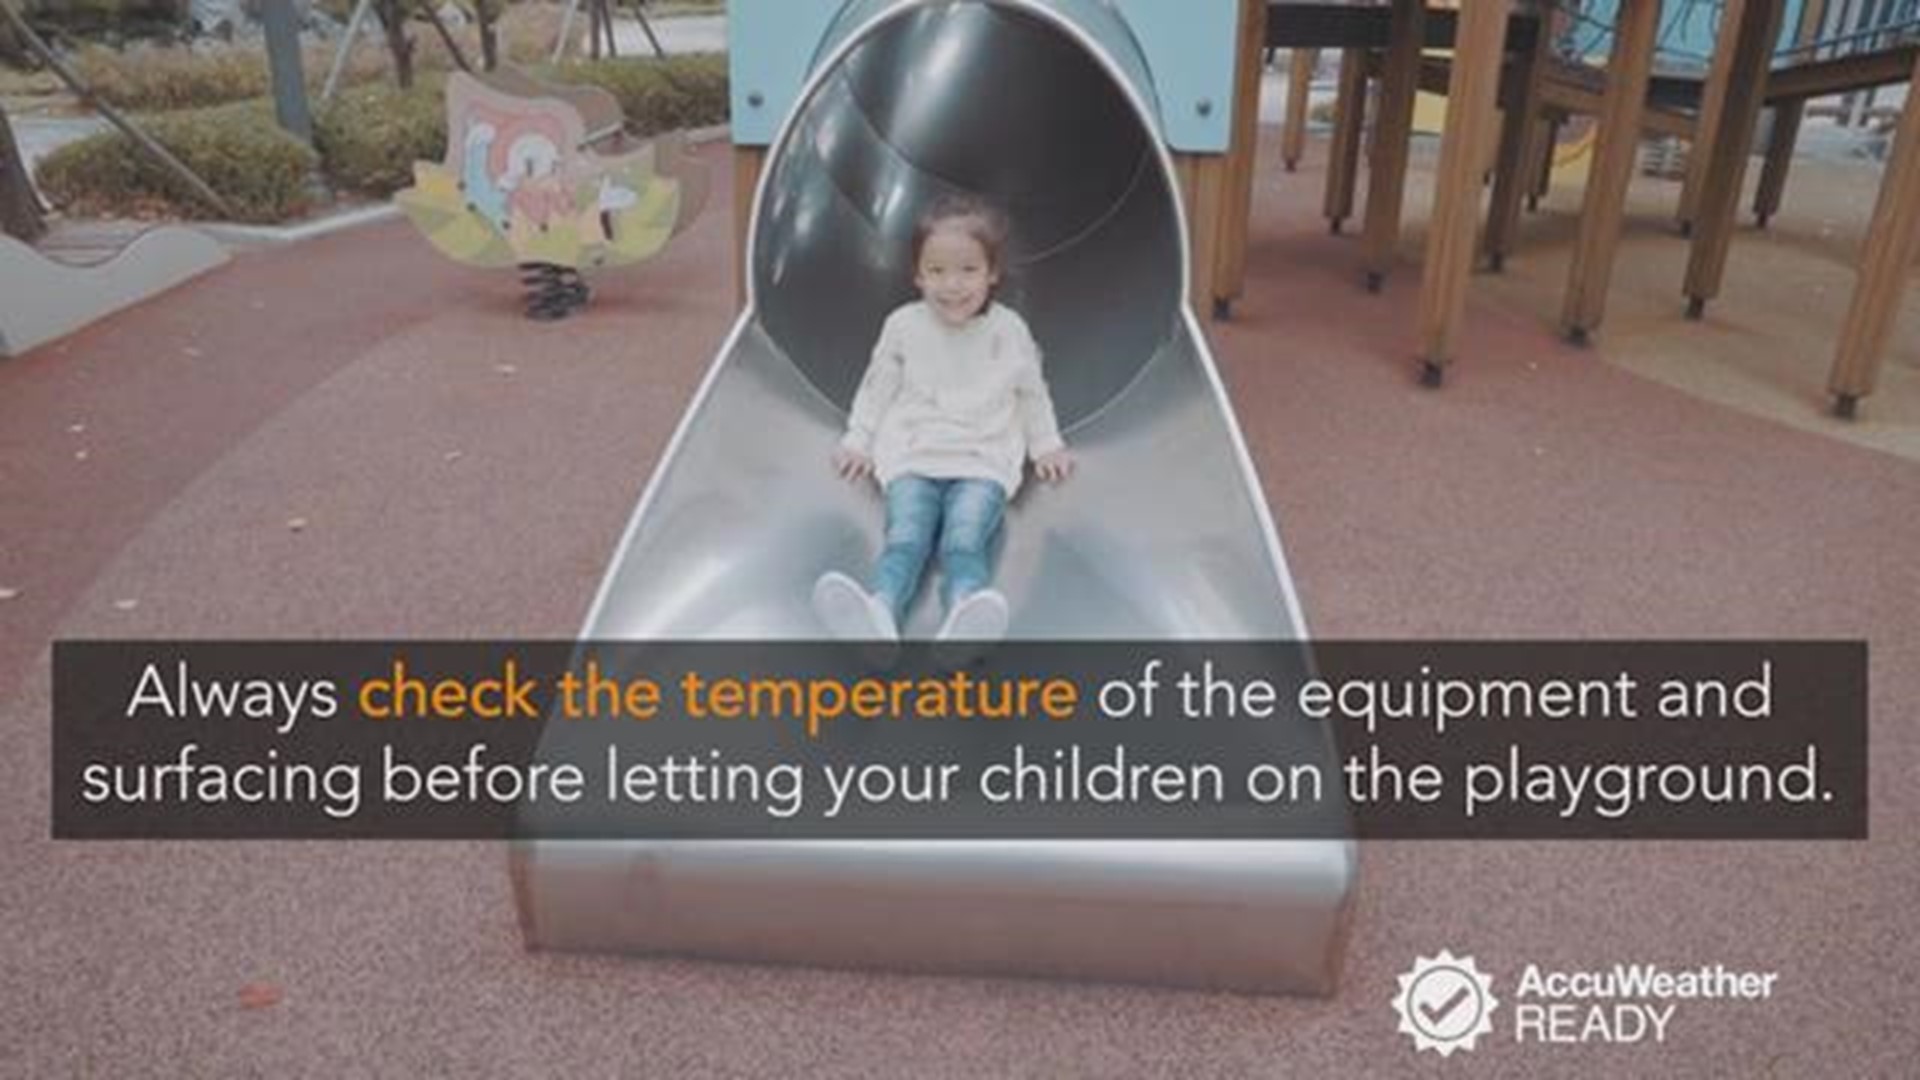 There were approximately 1,200 emergency department treated injuries involving burns associated with playground equipment between 2010 and 2015. There are a number of safety precautions to help keep your children safe while on a playground during a heat w